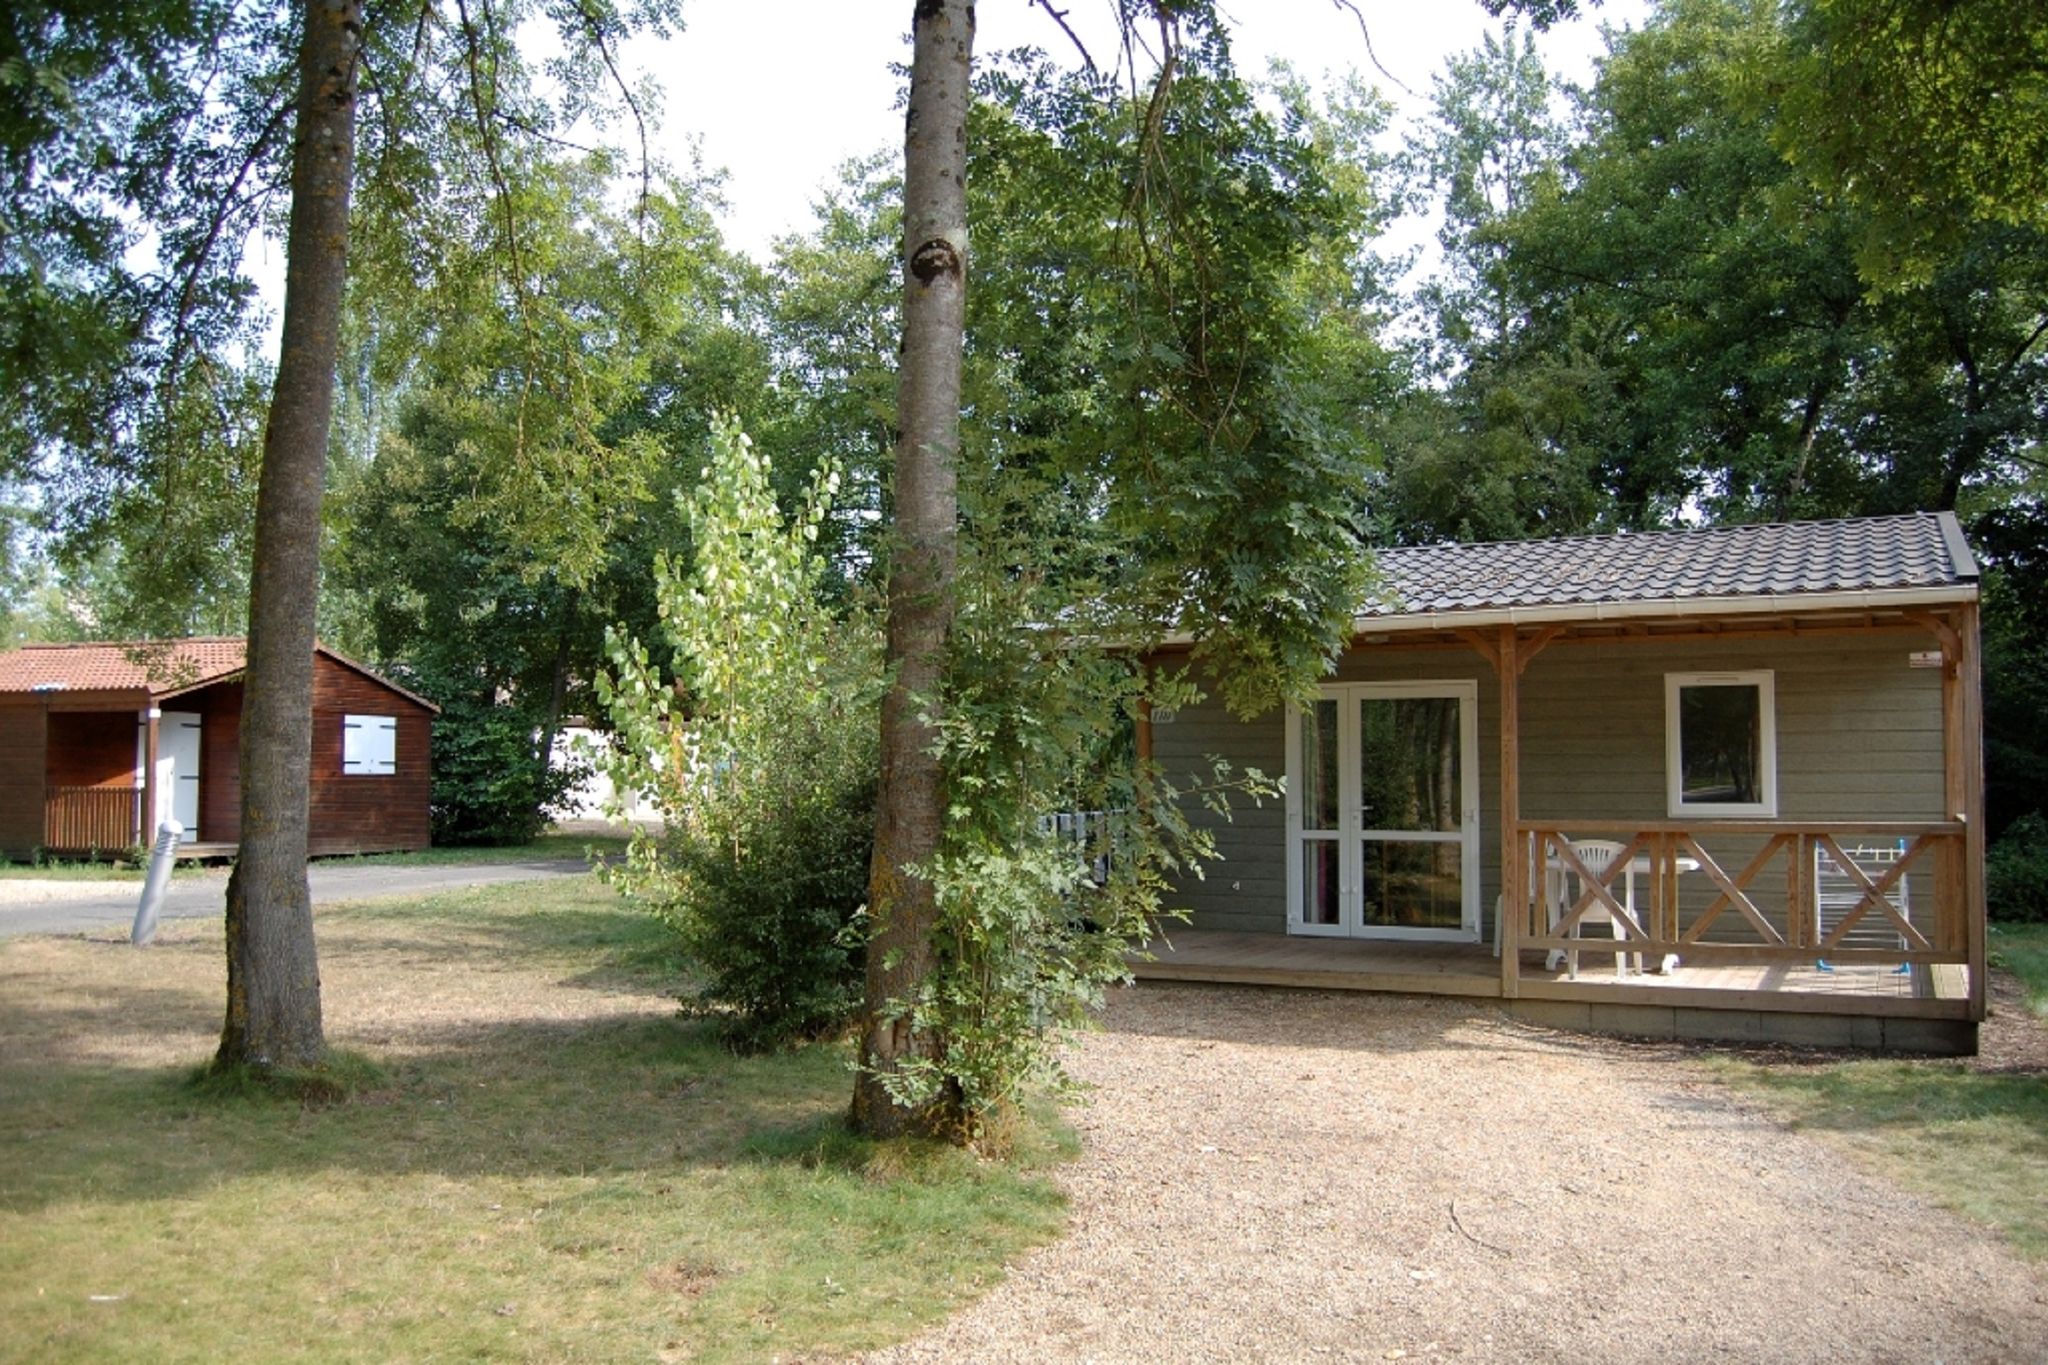 Detached chalet with dishwasher, located in natural region